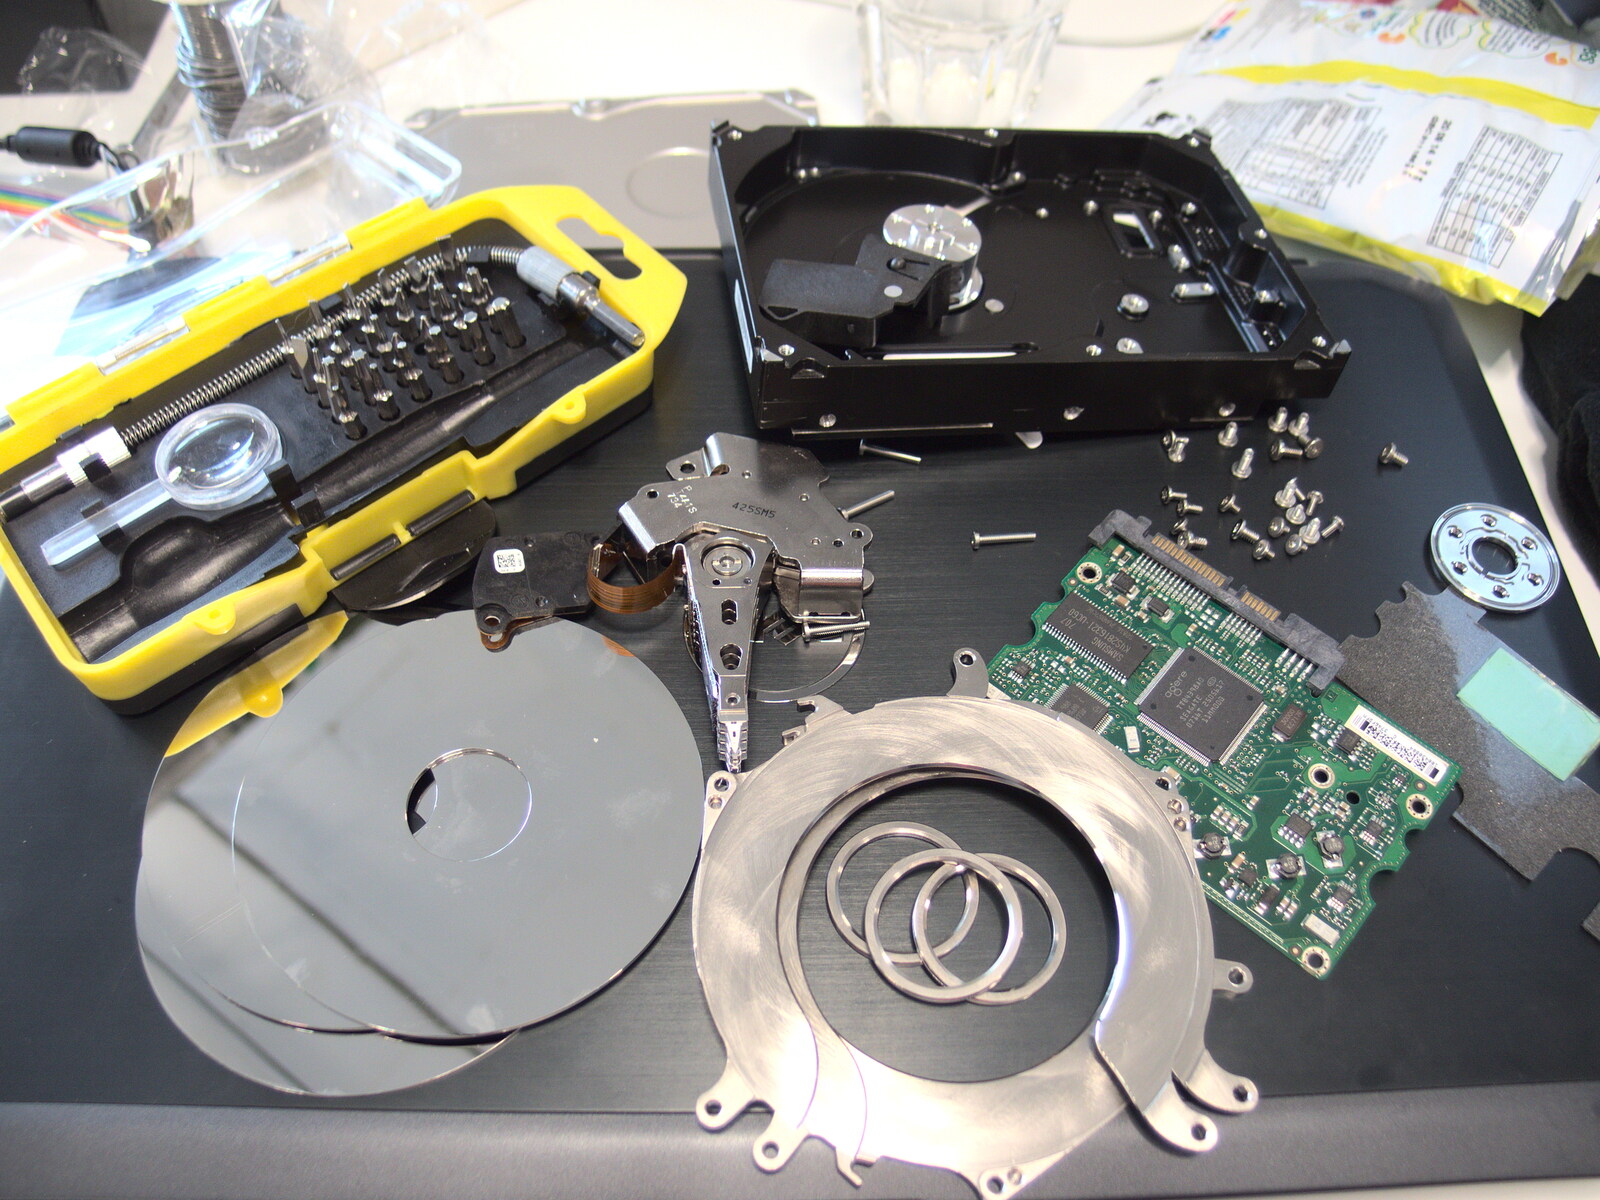 A Seagate Barracude 750G hard drive in bits from SwiftKey Innovation Days, The Haymarket, London - 27th June 2014